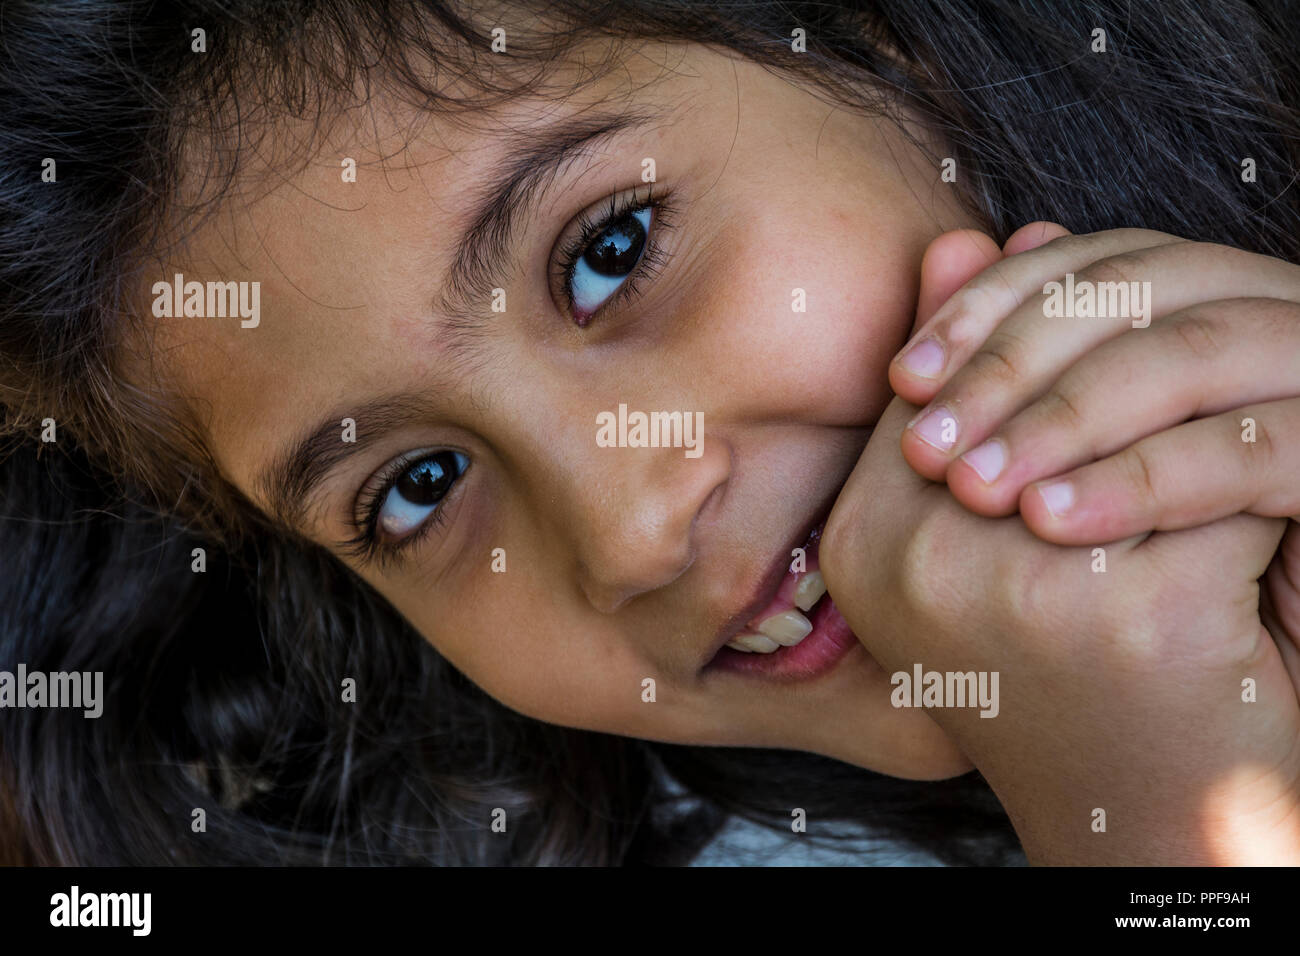 a girl from the Middle East Stock Photo